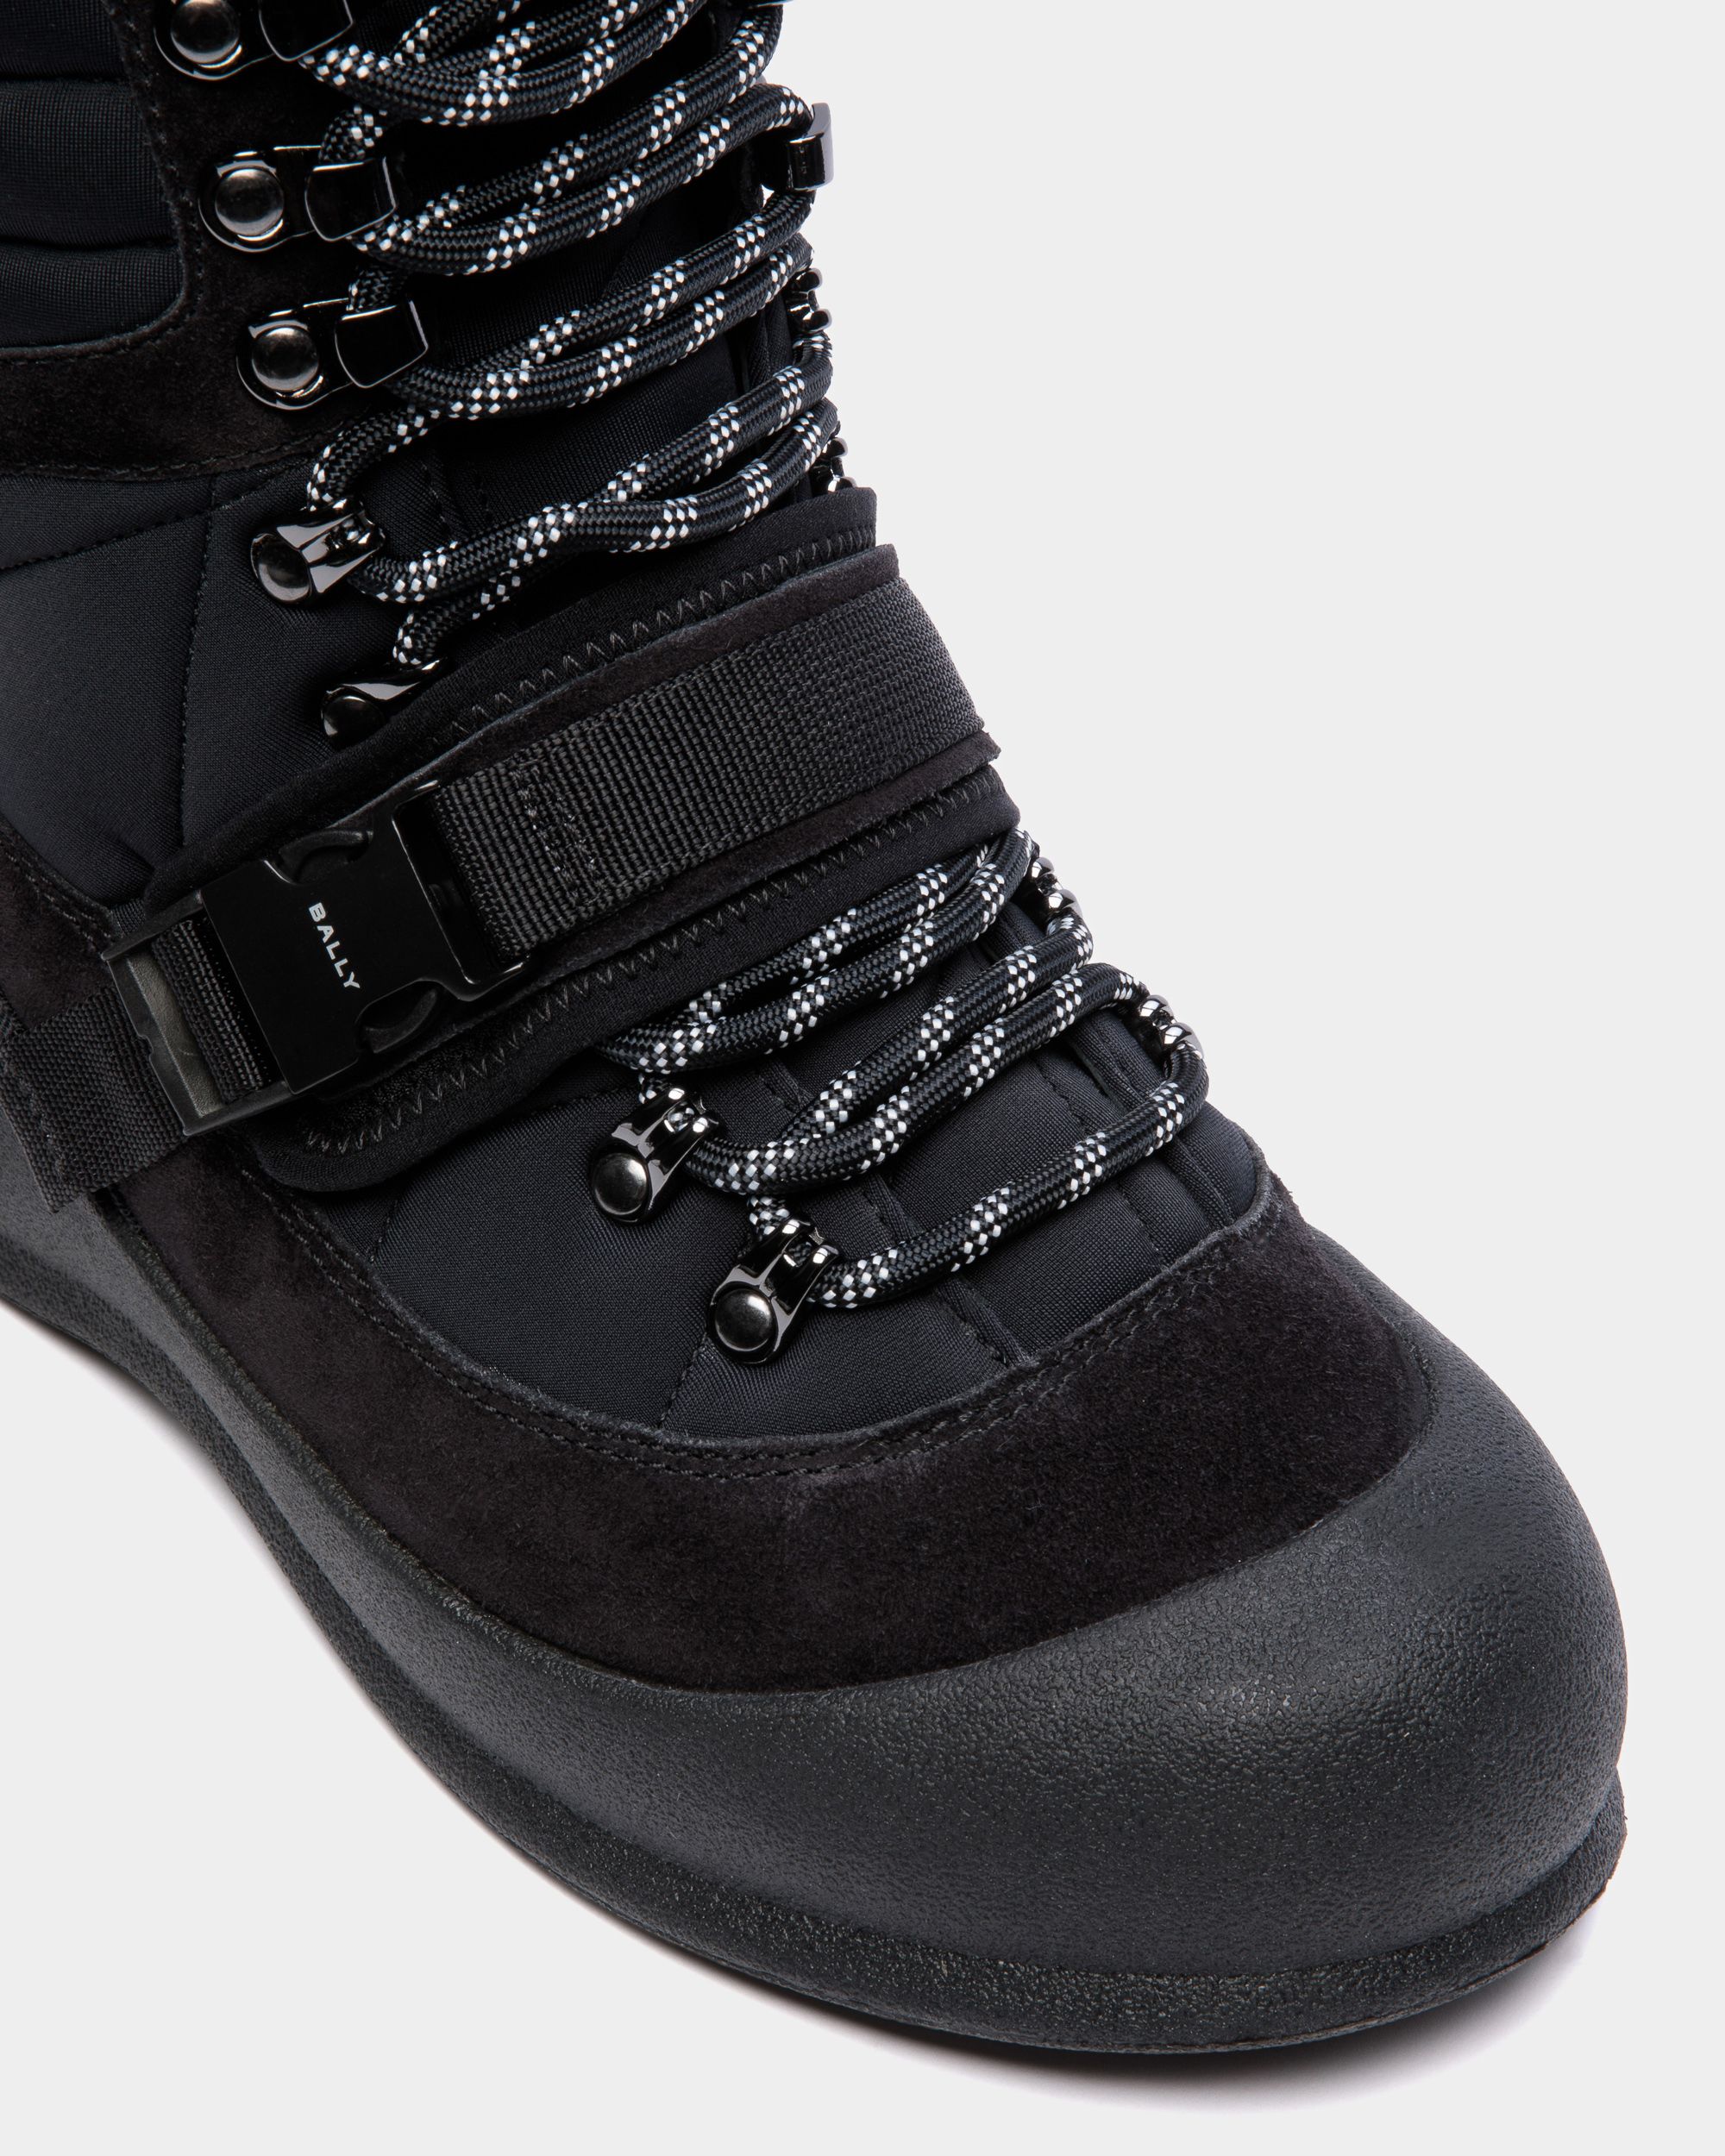 Frei | Women's Lace-Up Boot in Black Nylon | Bally | Still Life Detail